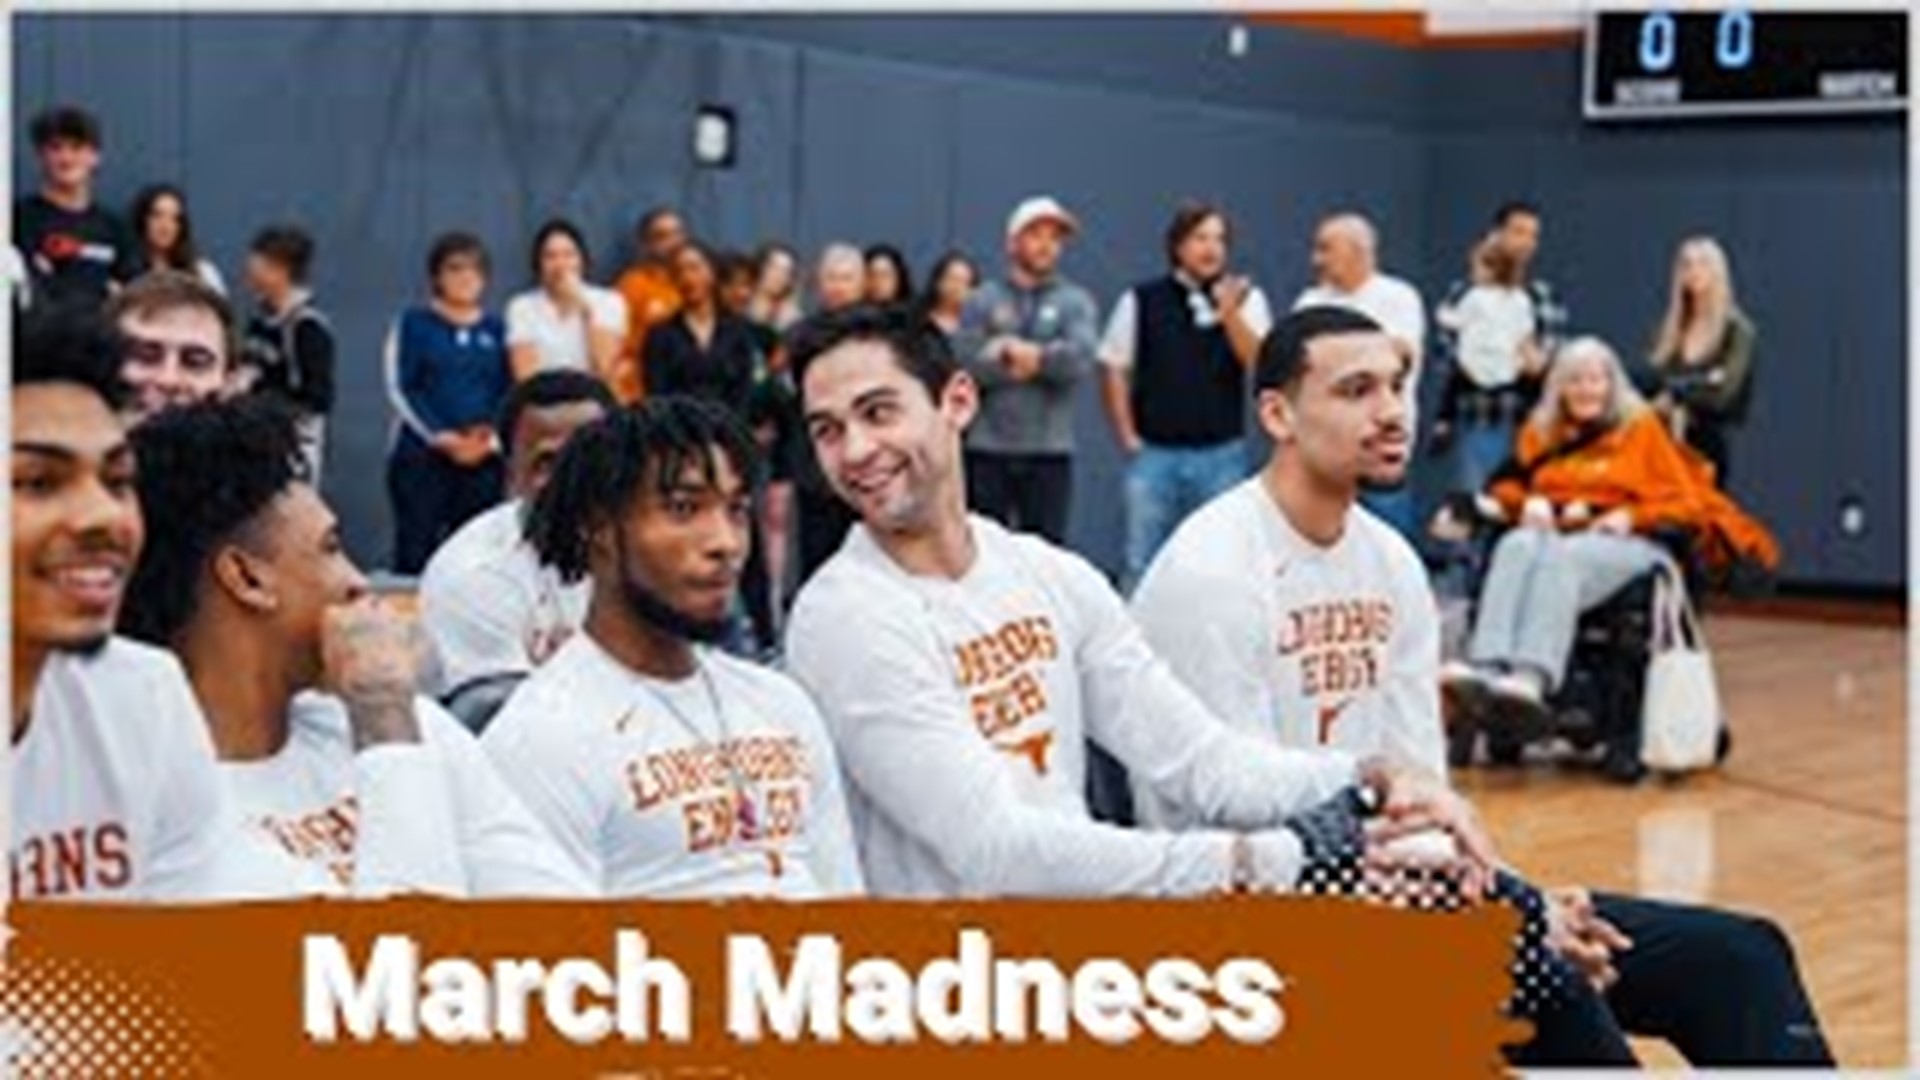 The Longhorns men and women's basketball teams both set out on their journeys for National Championships this week, as they look to bring home another trophy.